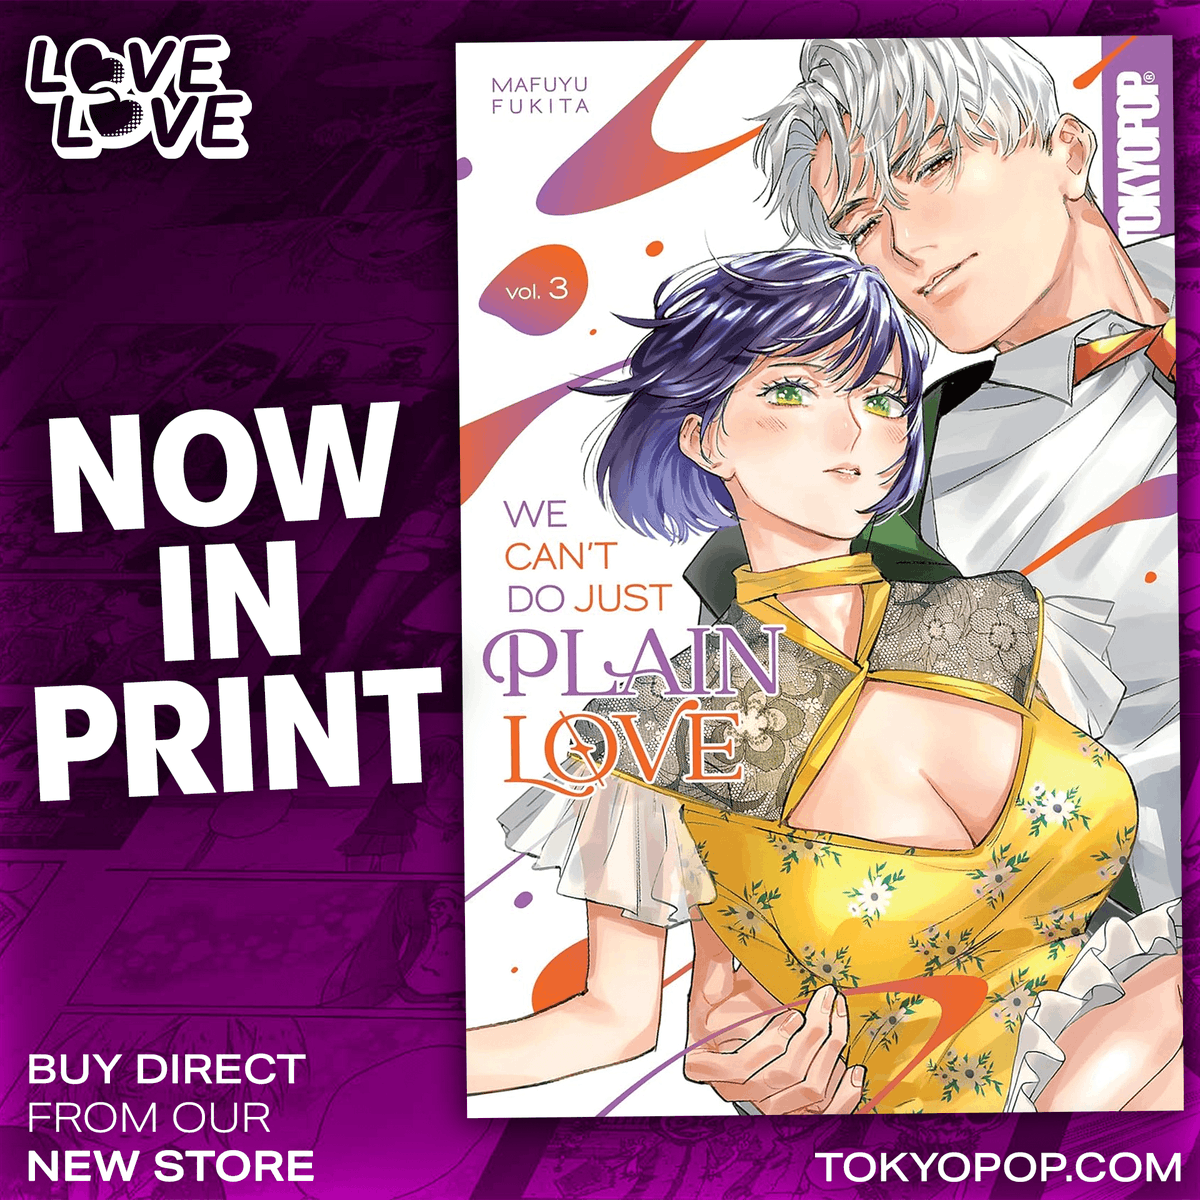 Office worker Sakura Yuino has been working diligently with her boss, Tatsuki Kiritani, on their 'special training' to help him overcome his arousal problem and things are going well. Perhaps too well... We Can't Do Just Plain Love, Vol 3 is now in print bit.ly/3yb6TYU